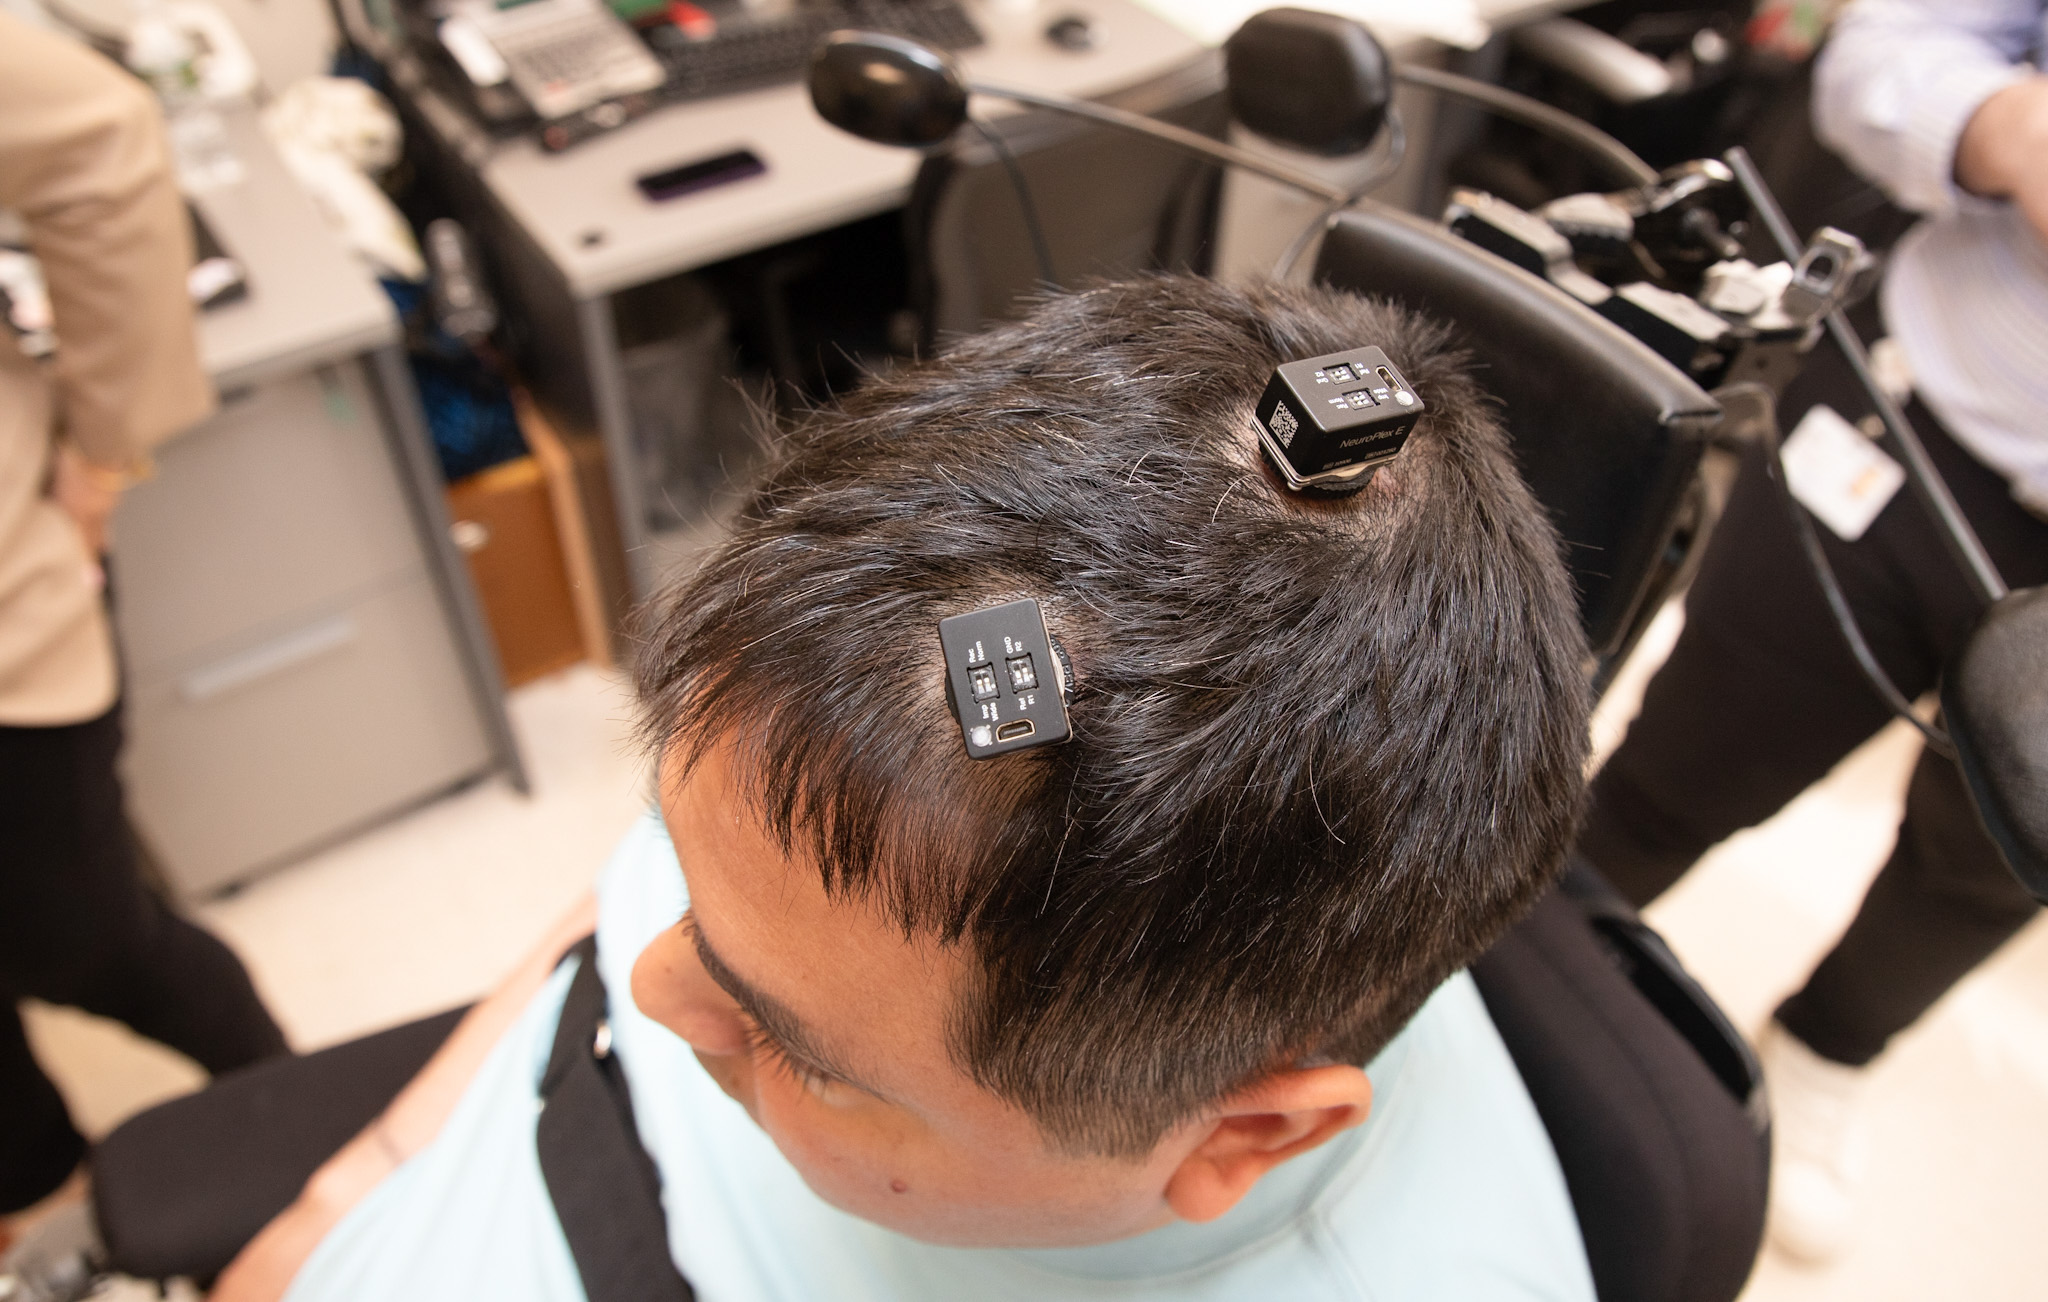 Keith Thomas, who lives with paralysis, had five tiny electrode arrays implanted in his brain in a novel technique known as double neural bypass. When connected to a computer, the chips use artificial intelligence to decode and translate his thoughts into action. (Courtesy Feinstein Institutes for Medical Research)